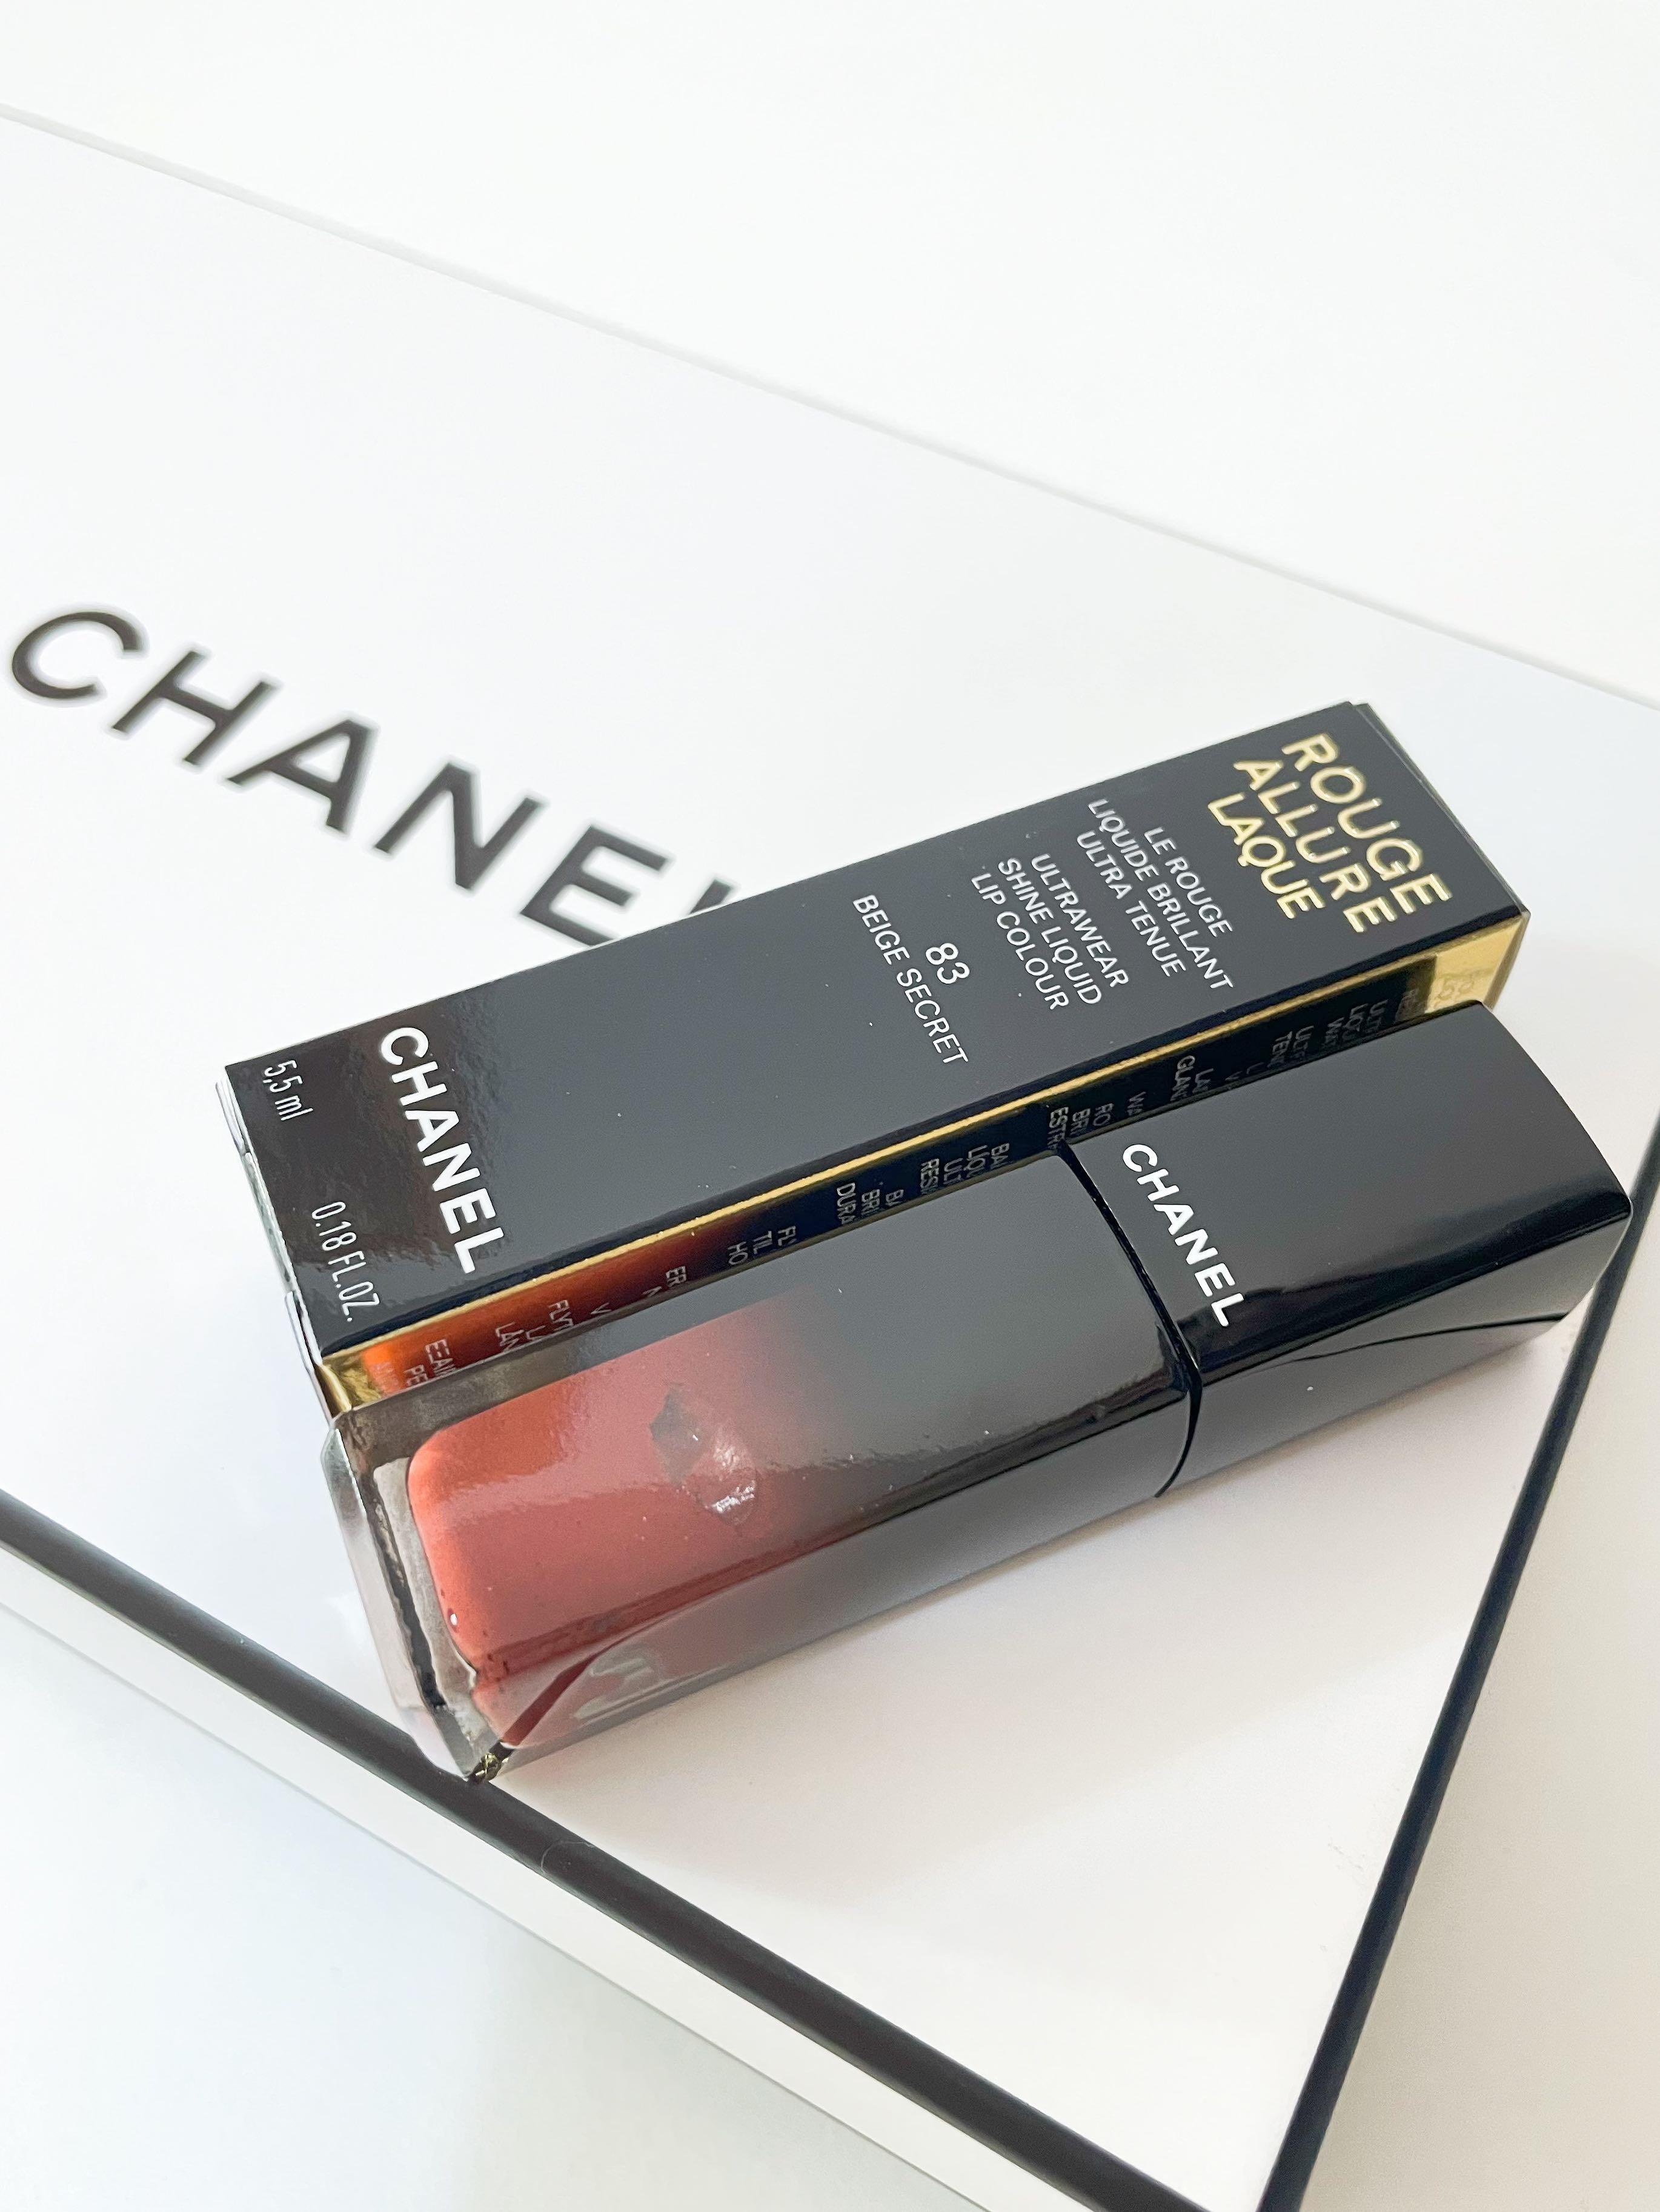 Chanel 83 Rouge Allure Laque Ultrawear Shine Liquid Lip Colour Sub-Packing  Repacked Trial